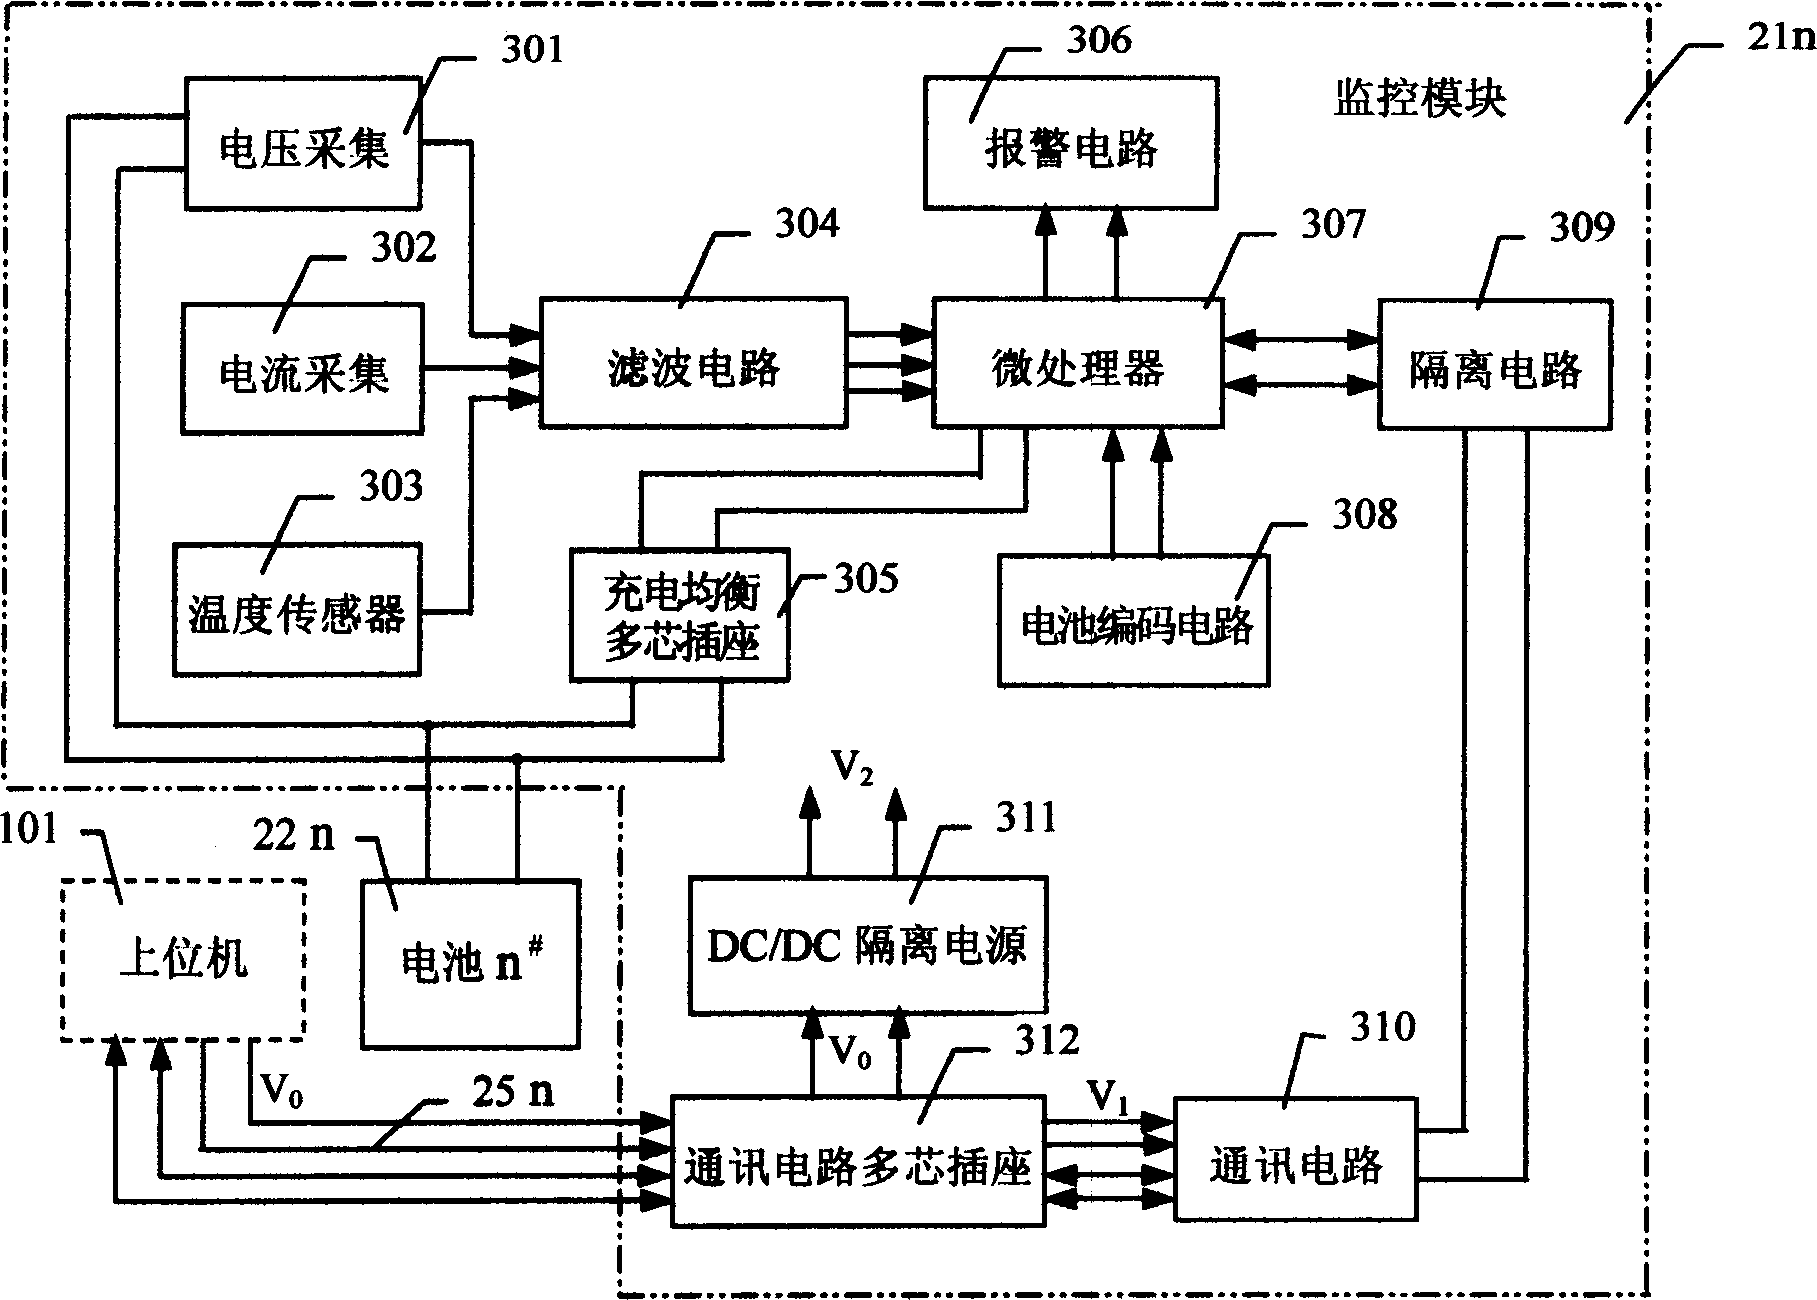 Method for forming battery running system of electric vehicle and system said above